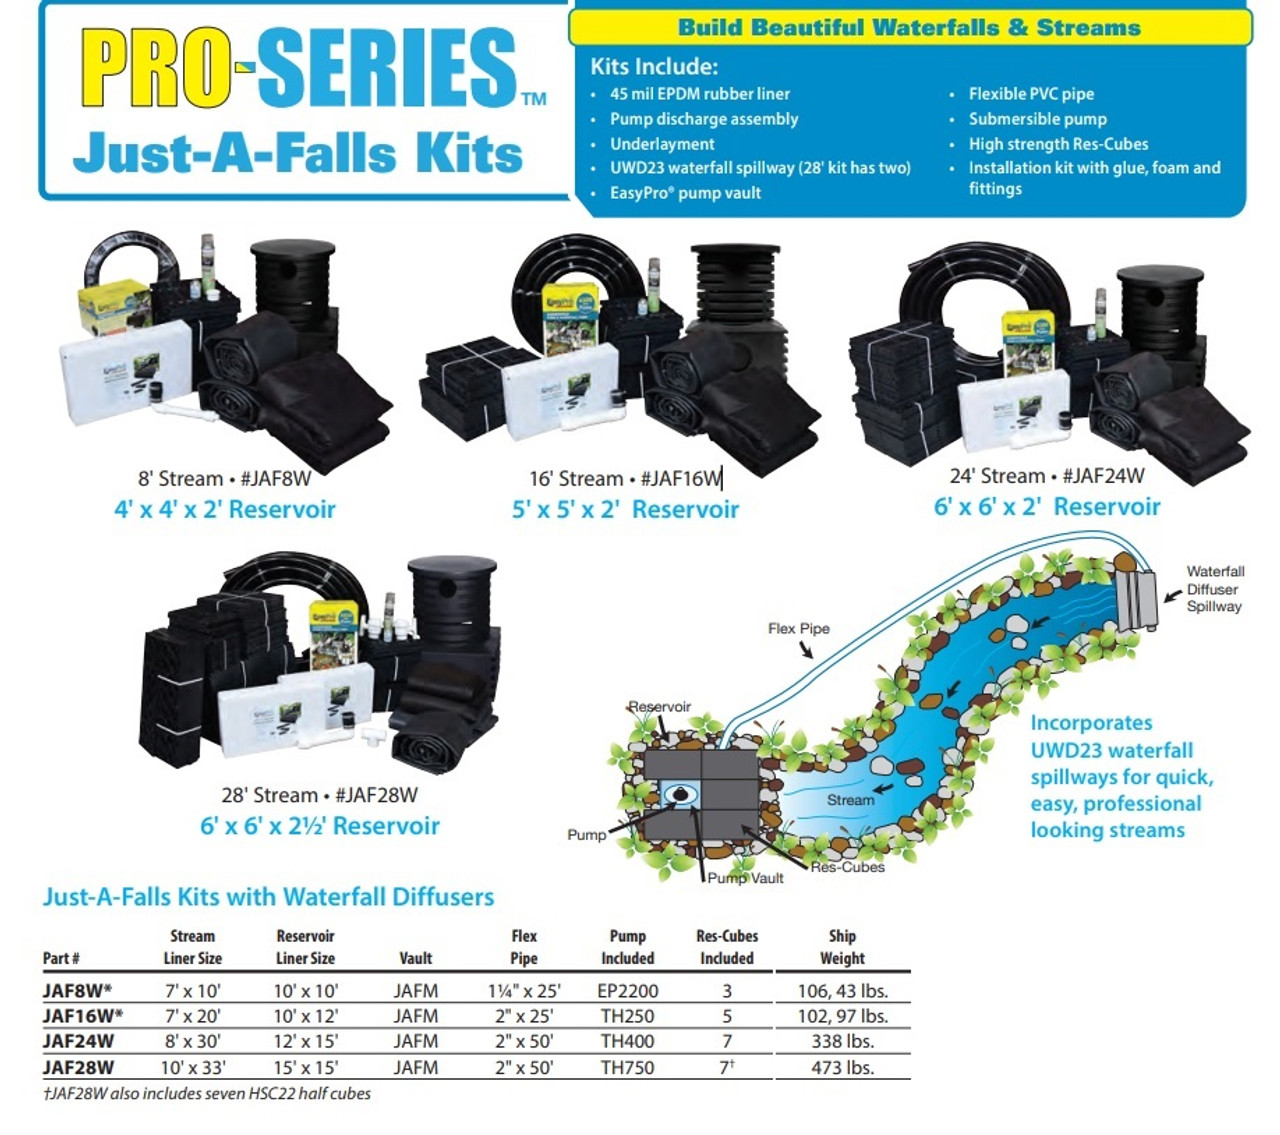 EasyPro Pro-Series Just-A-Falls Kit - 28 Ft. Stream